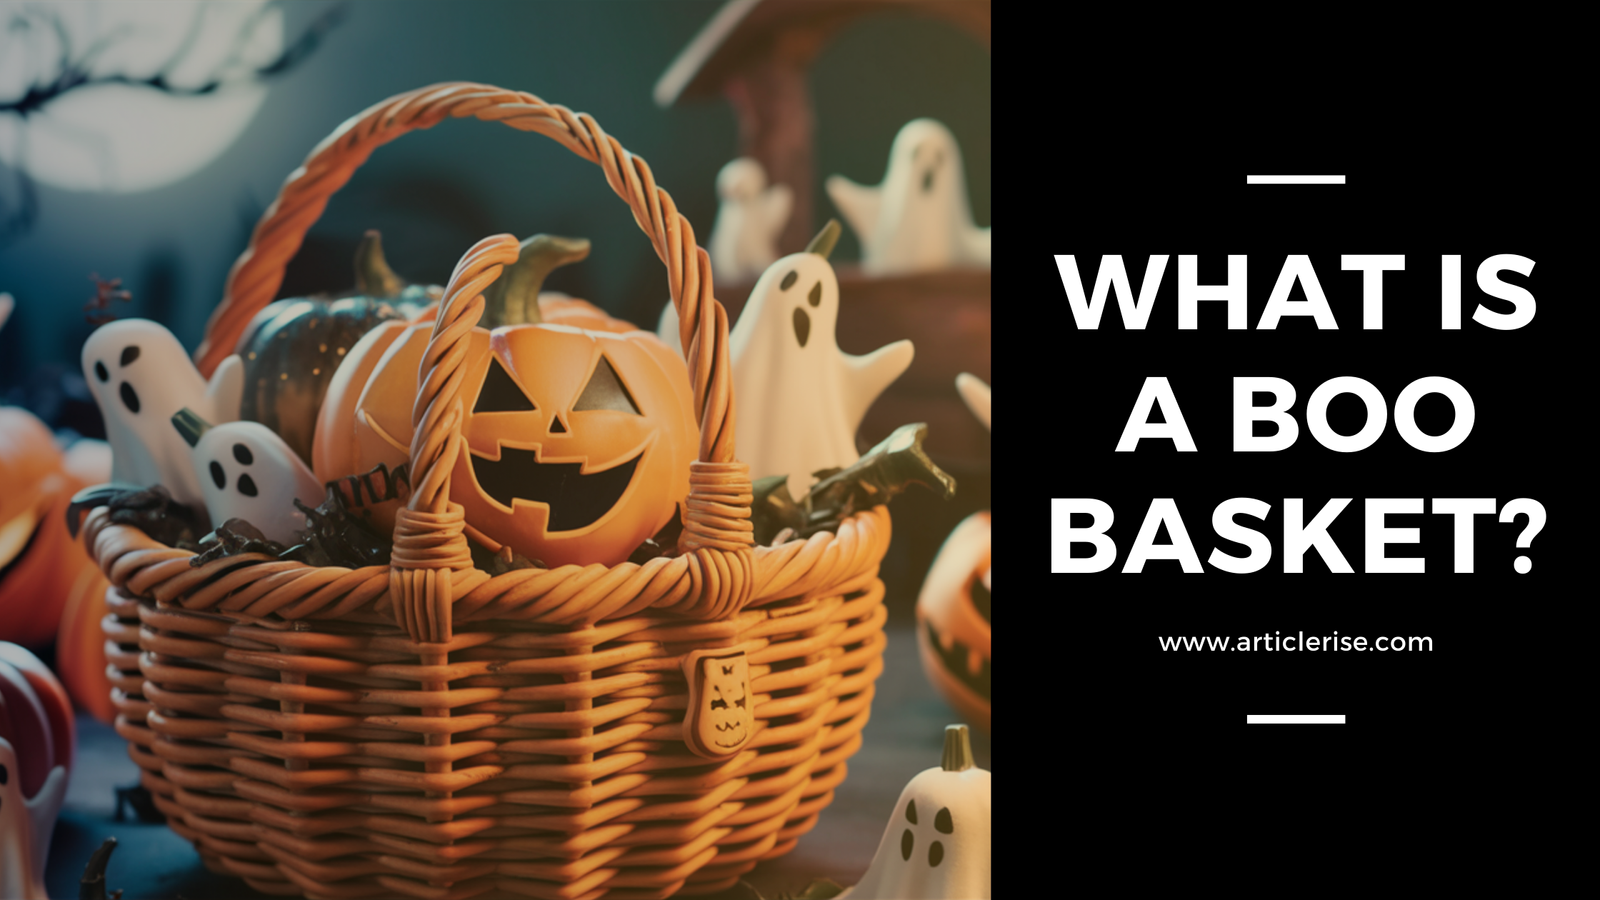 What is a boo basket